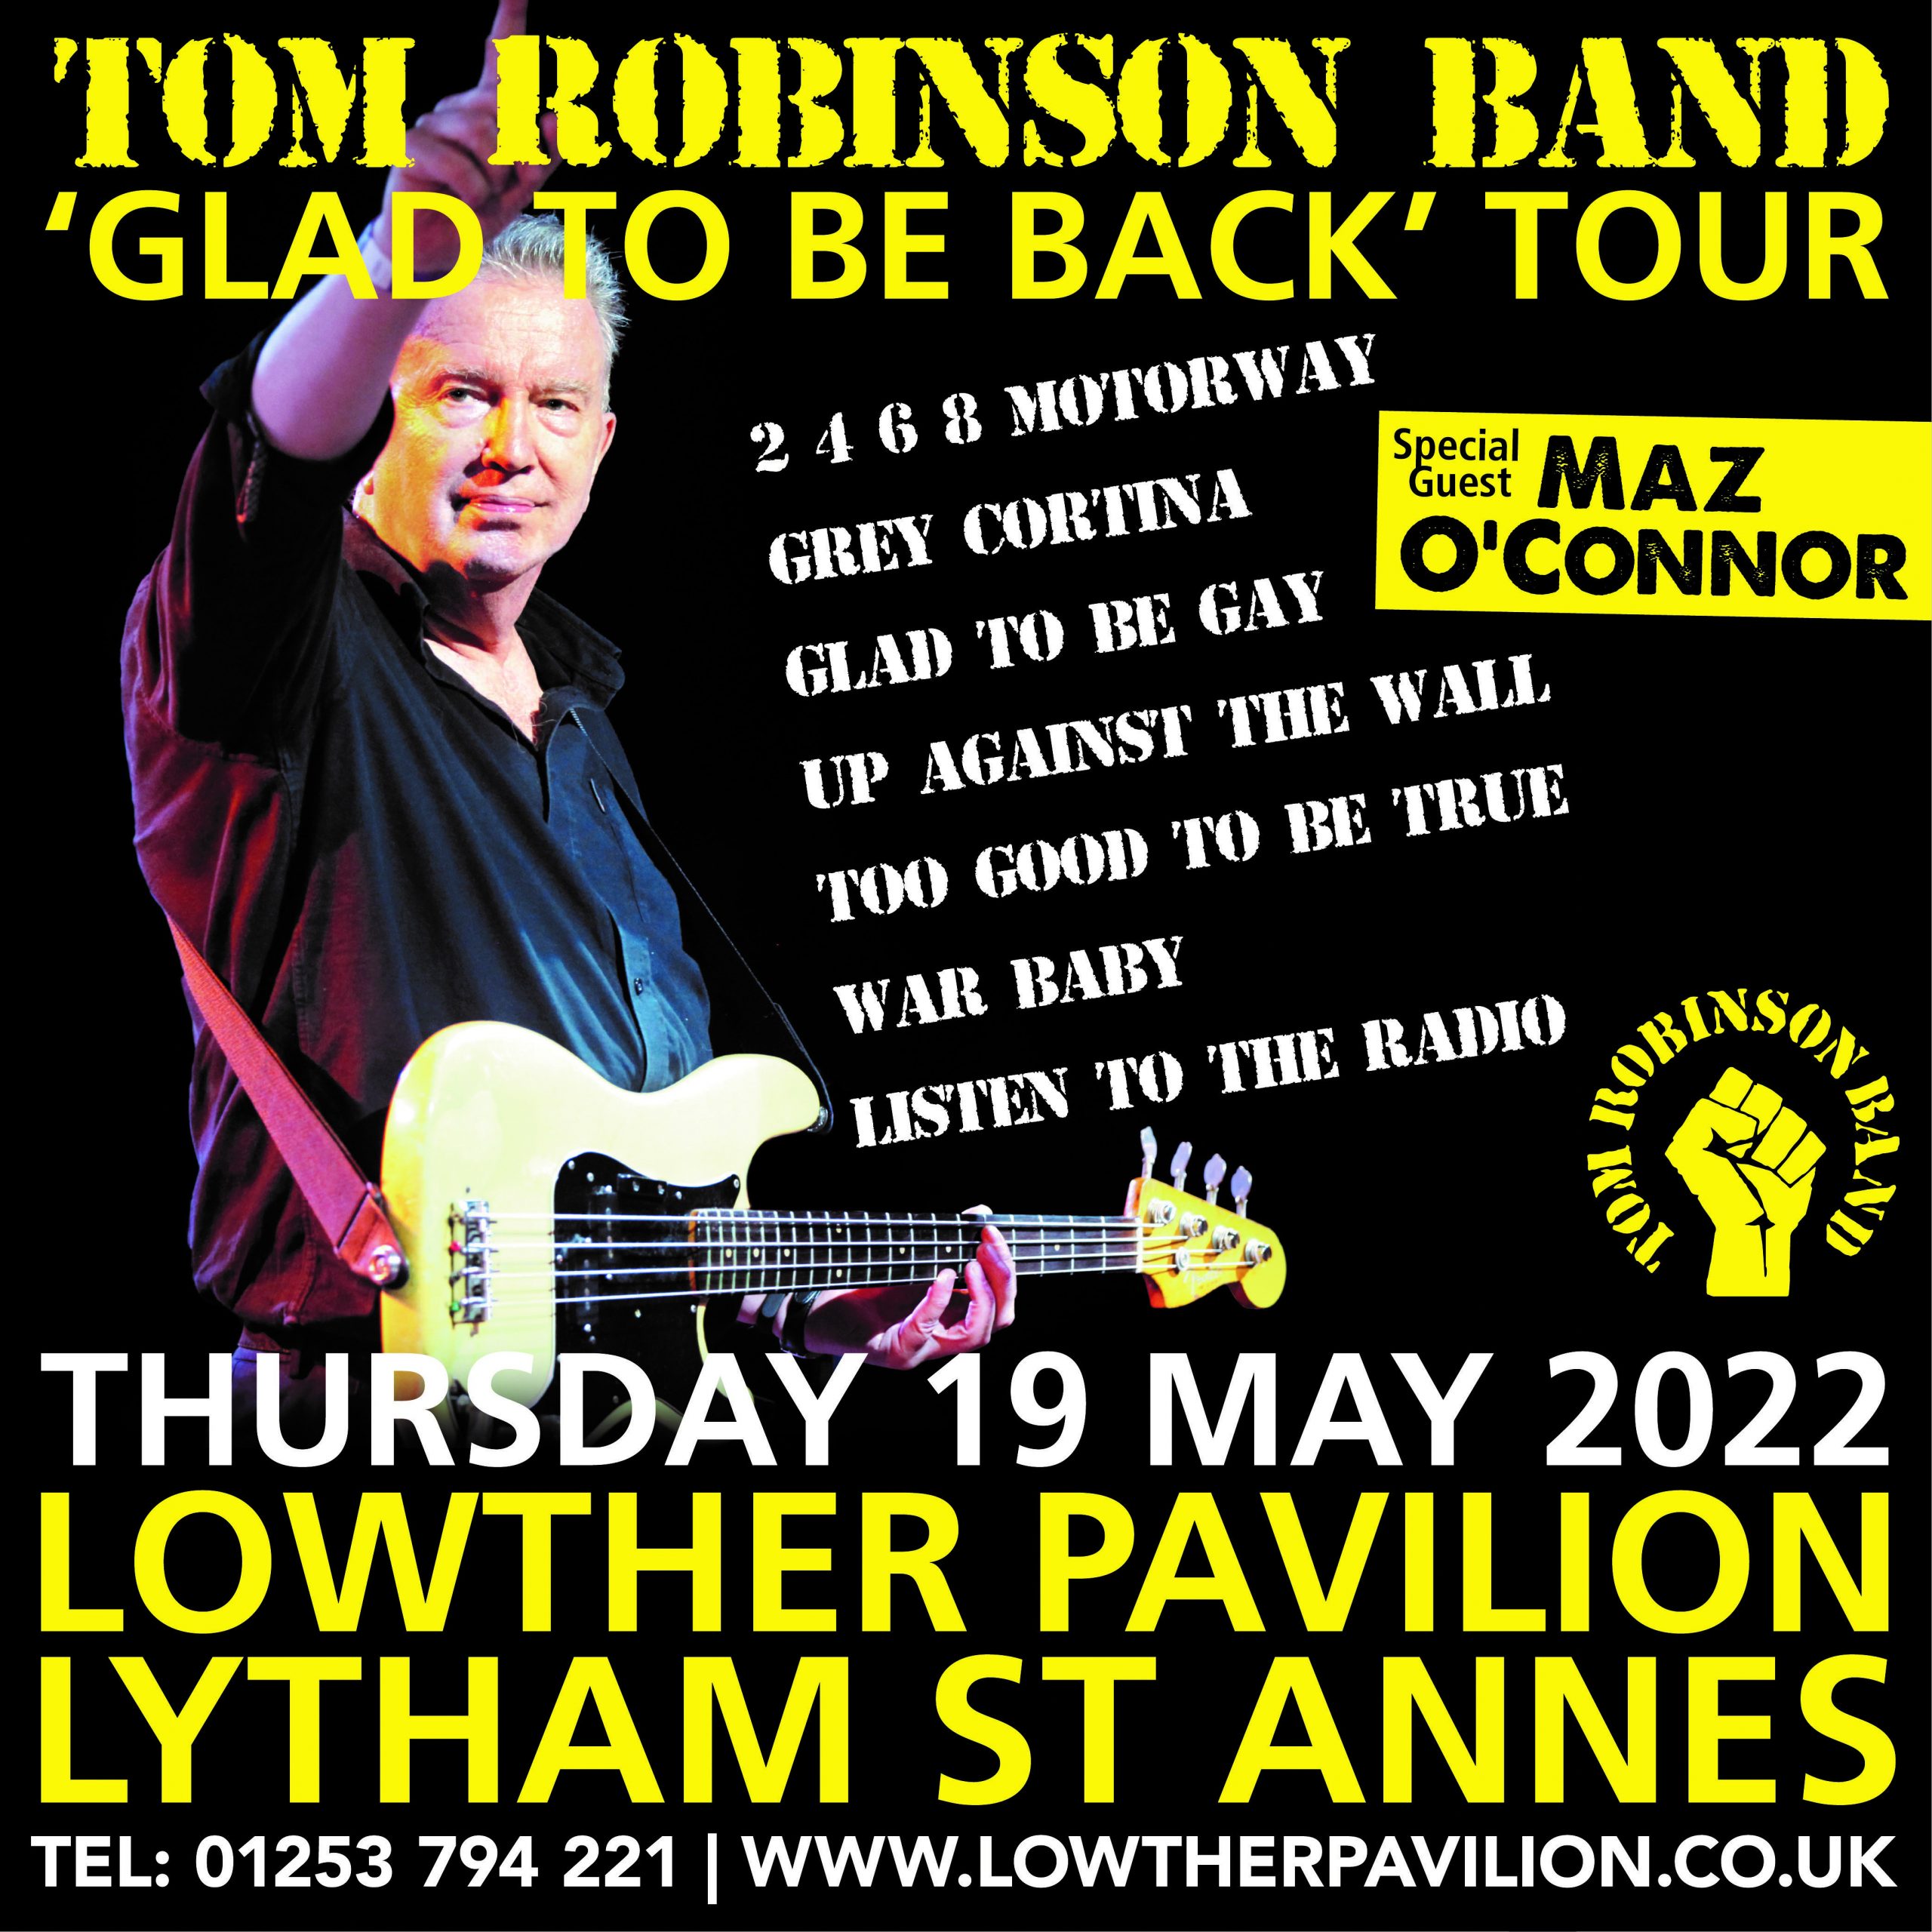 Lowther Pavilion, opening for Tom Robinson